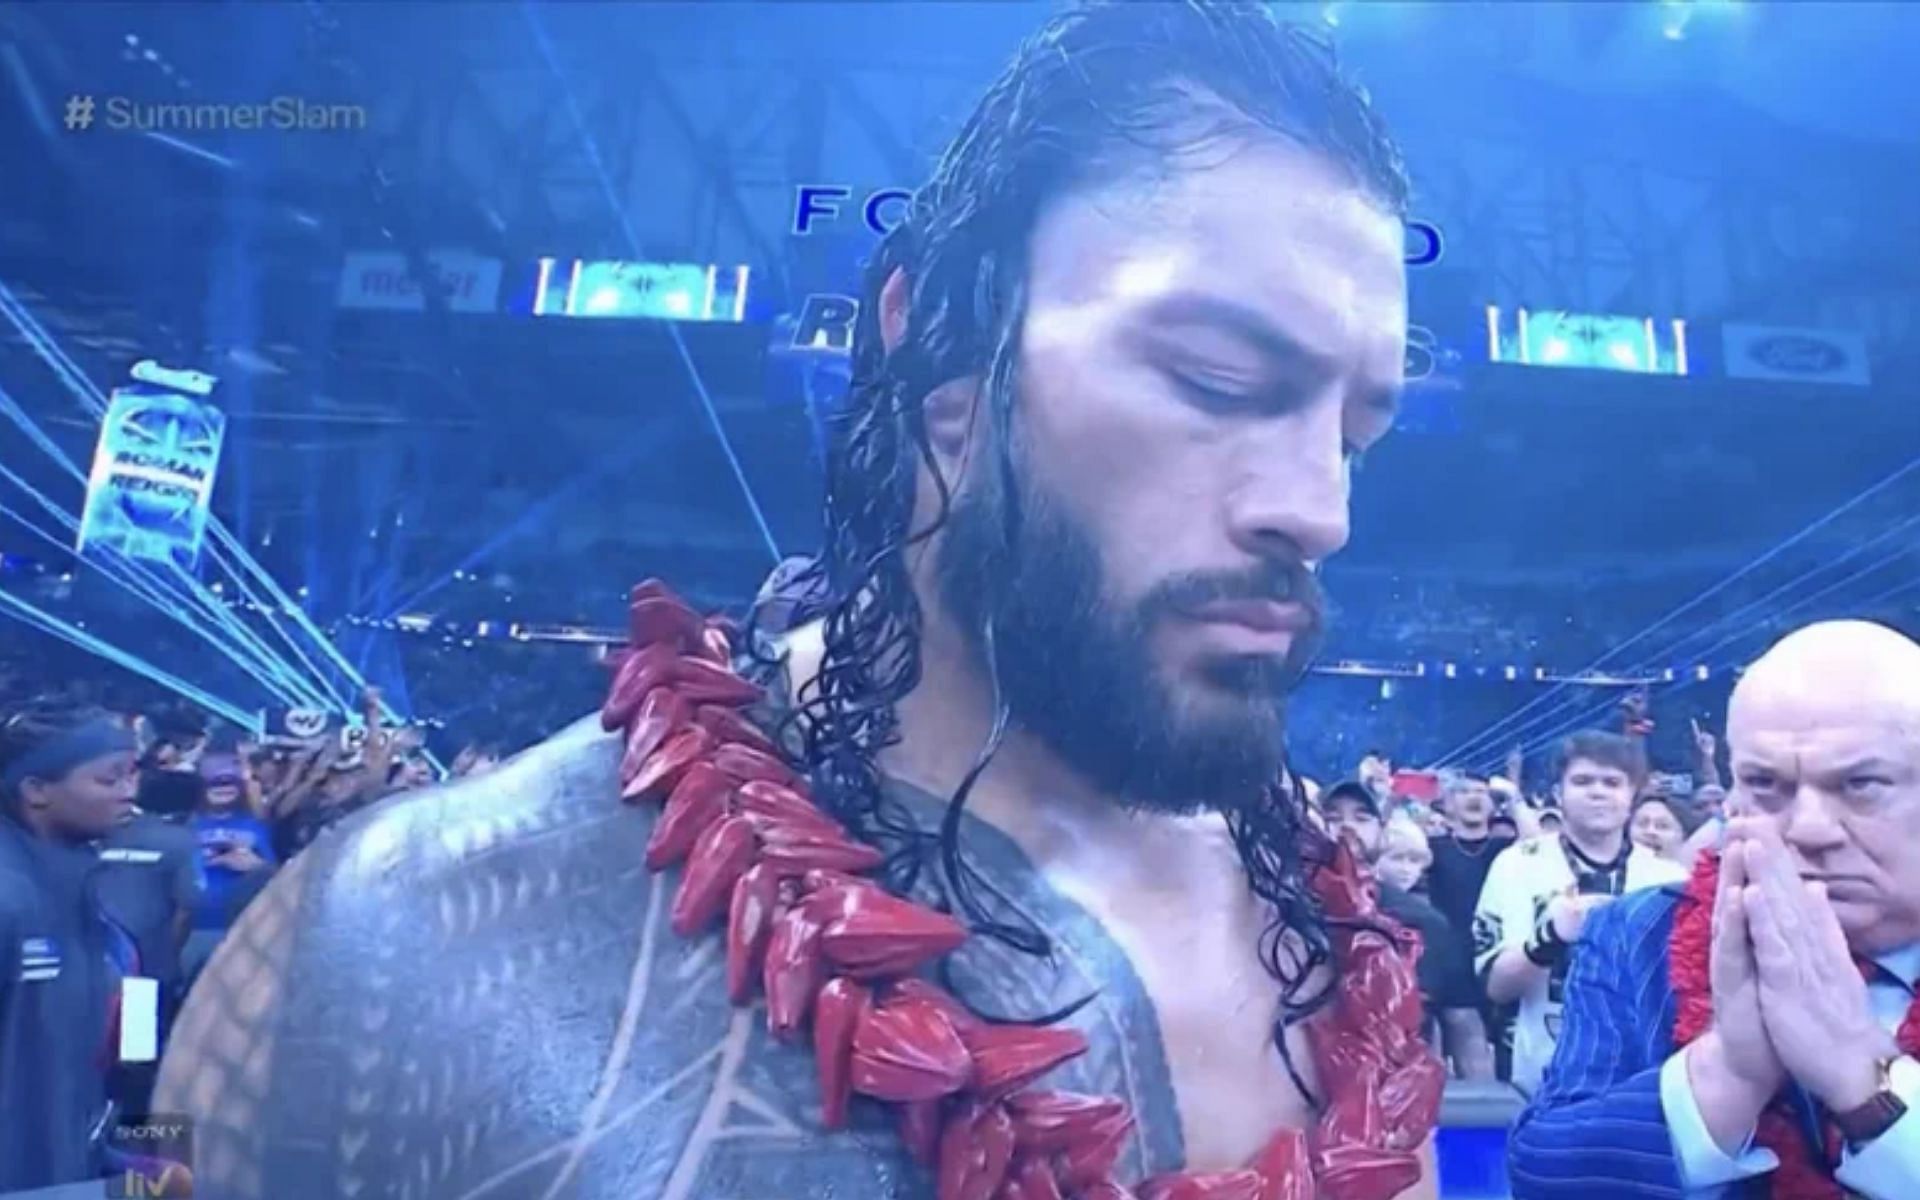 Reigns stood tall for the fourth SummerSlam in a row